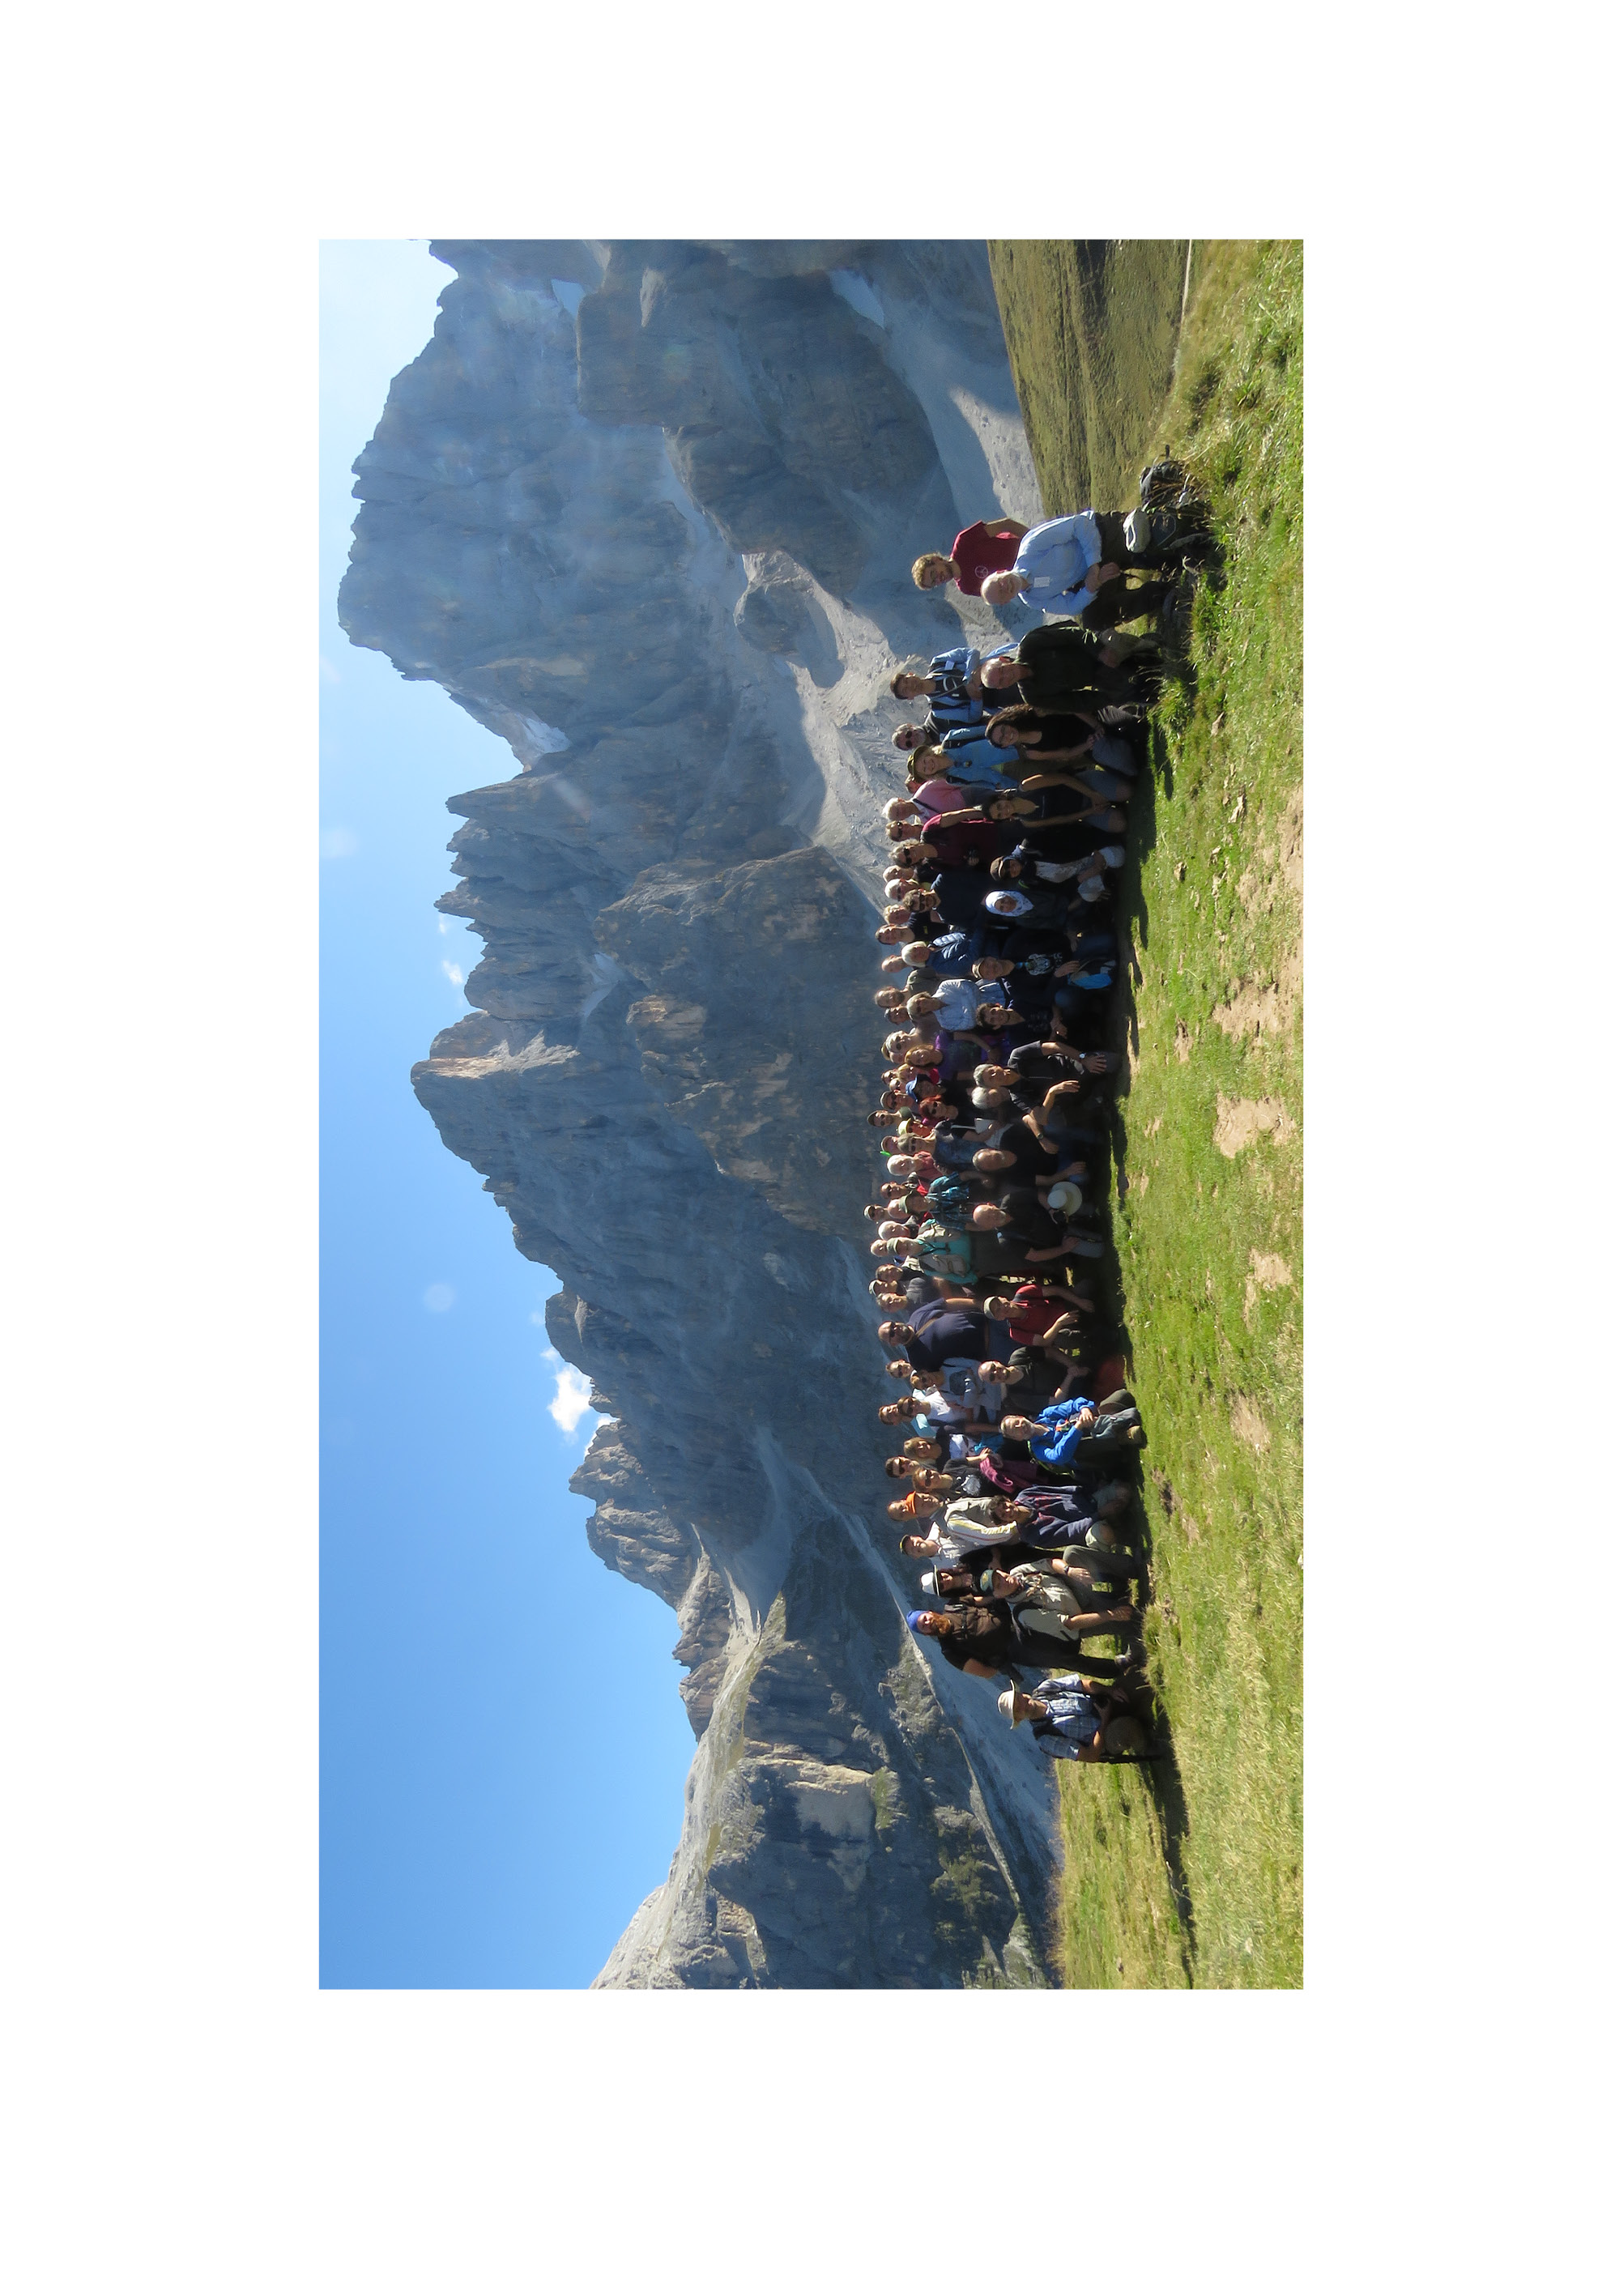 List of participants of the 19th European Carabidologists’ Meeting Primiero San Martino di Castrozza, Trento, Italy 16–20 September 2019